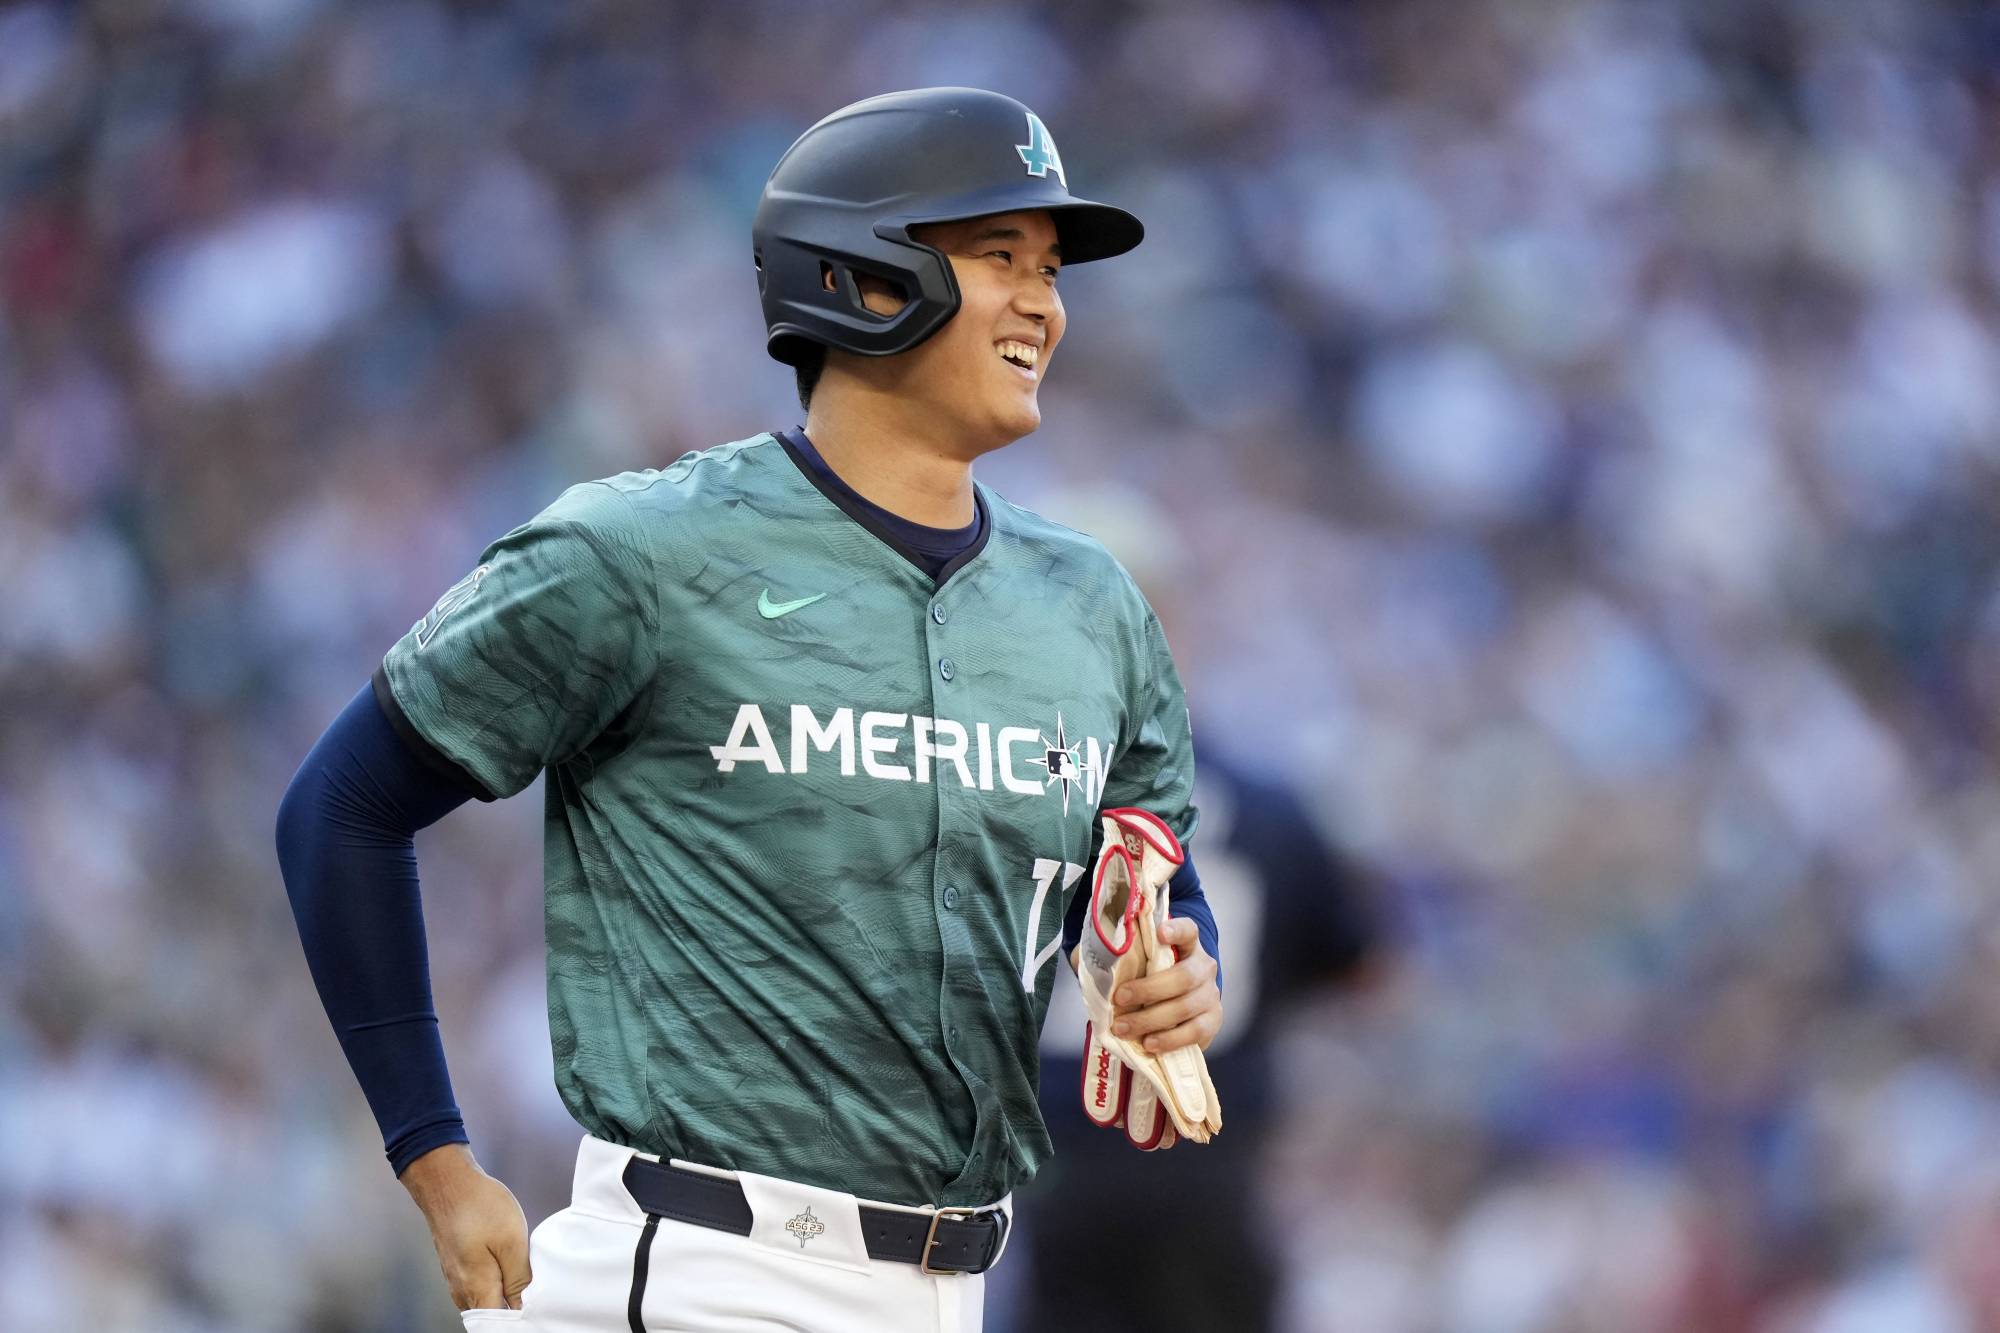 Shohei Ohtani struck out once and drew a walk during the MLB All-Star Game in Seattle on Tuesday. | USA TODAY / VIA REUTERS